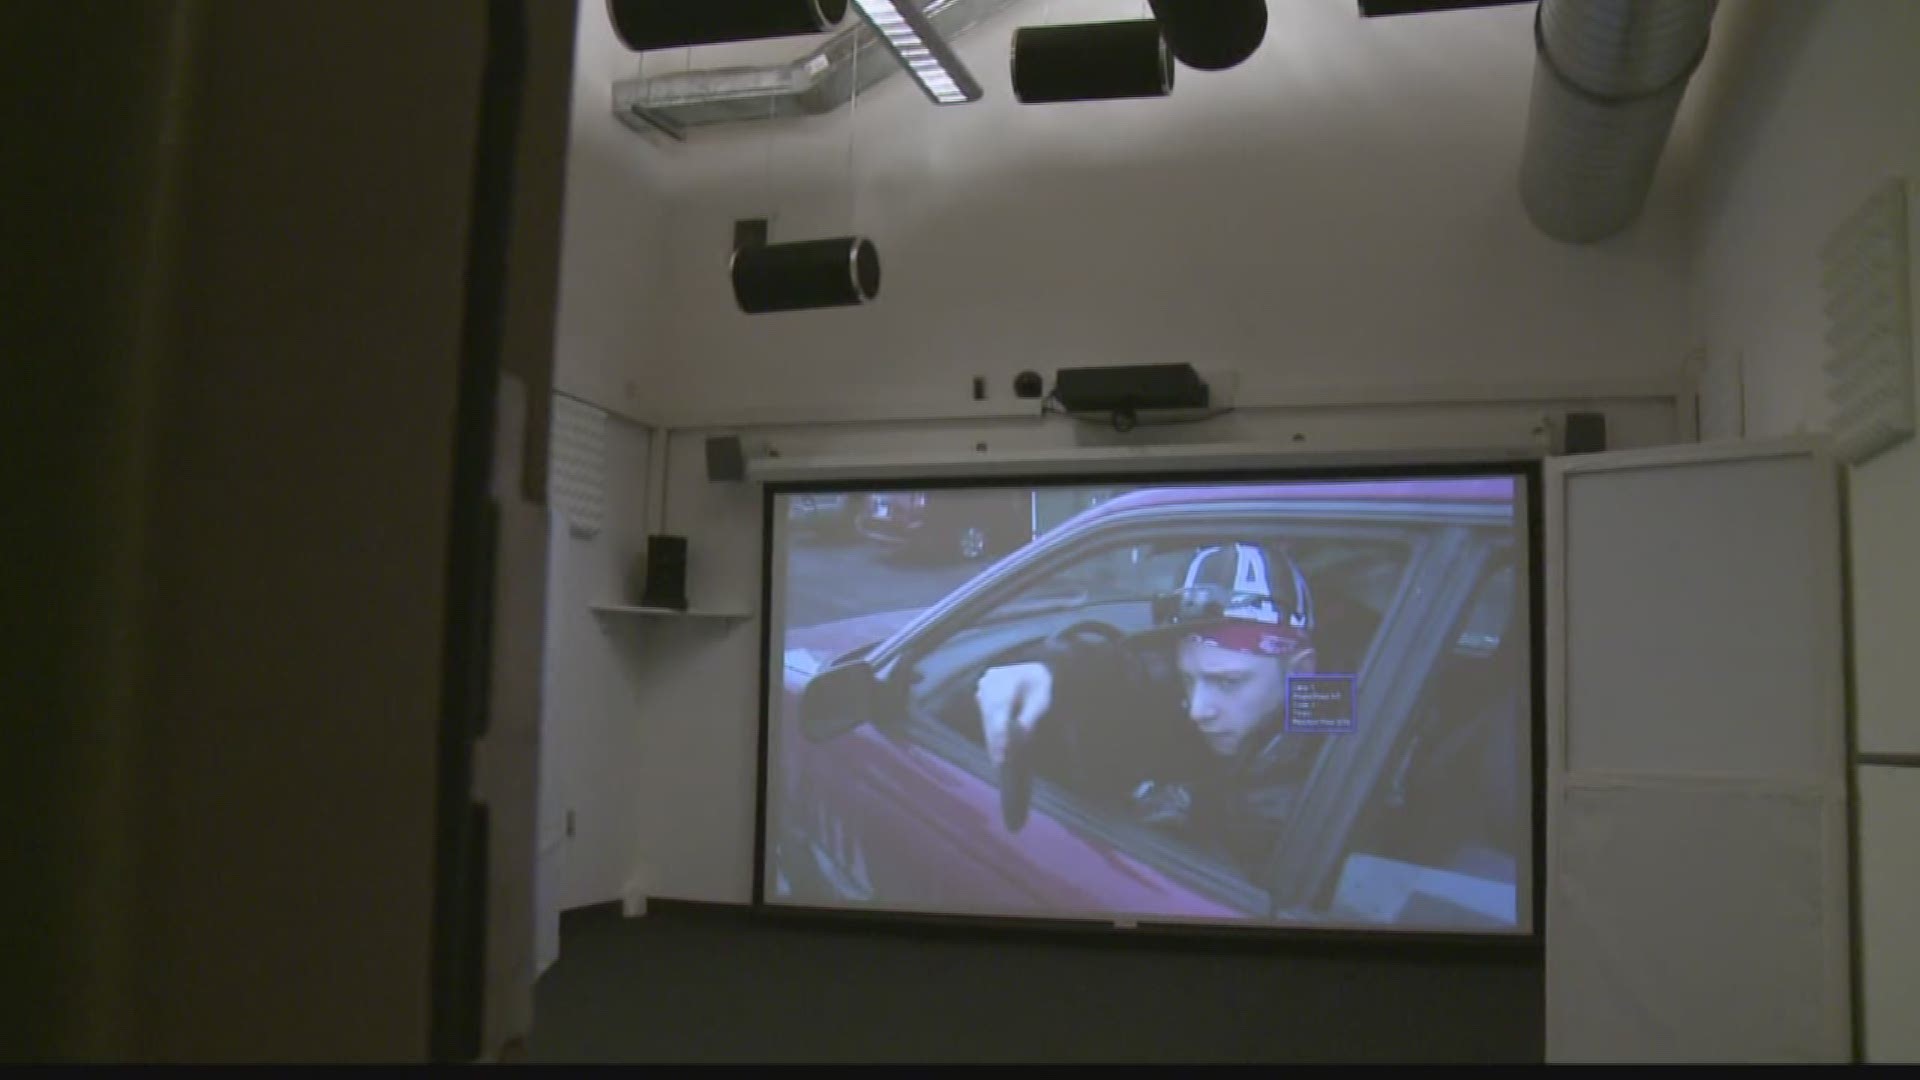 Researchers at the Washington State University Spokane campus made big strides Tuesday with their technology designed to improve how police officers train.